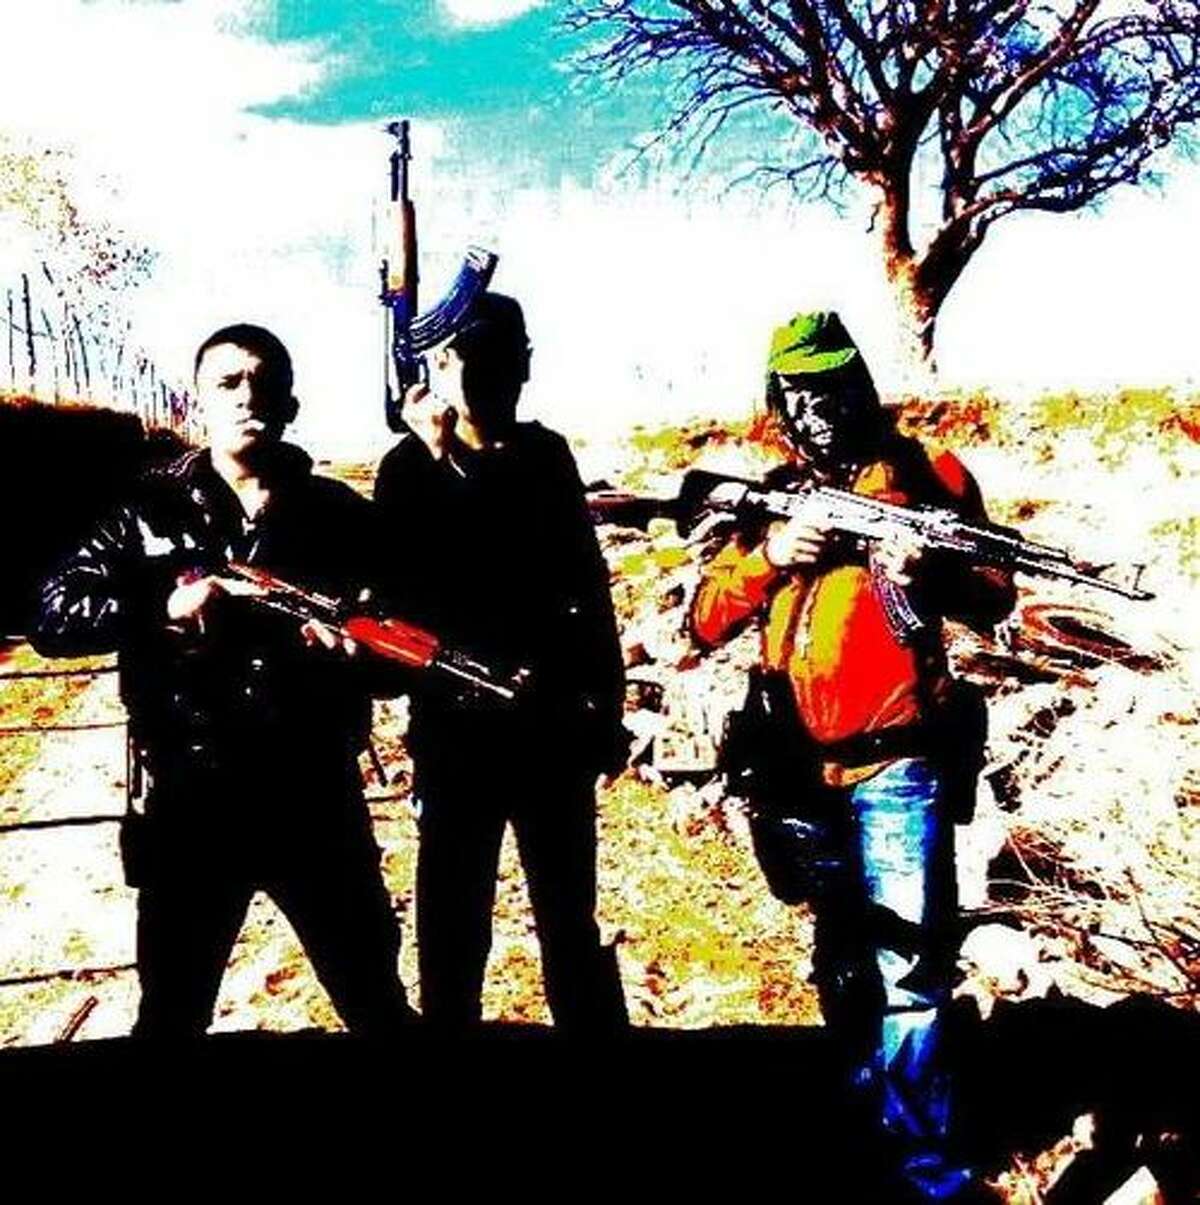 La Linea The Mexican website El Blog del Narco published more than two dozen photos of the La Linea organization, the armed wing of the Juarez drug cartel in